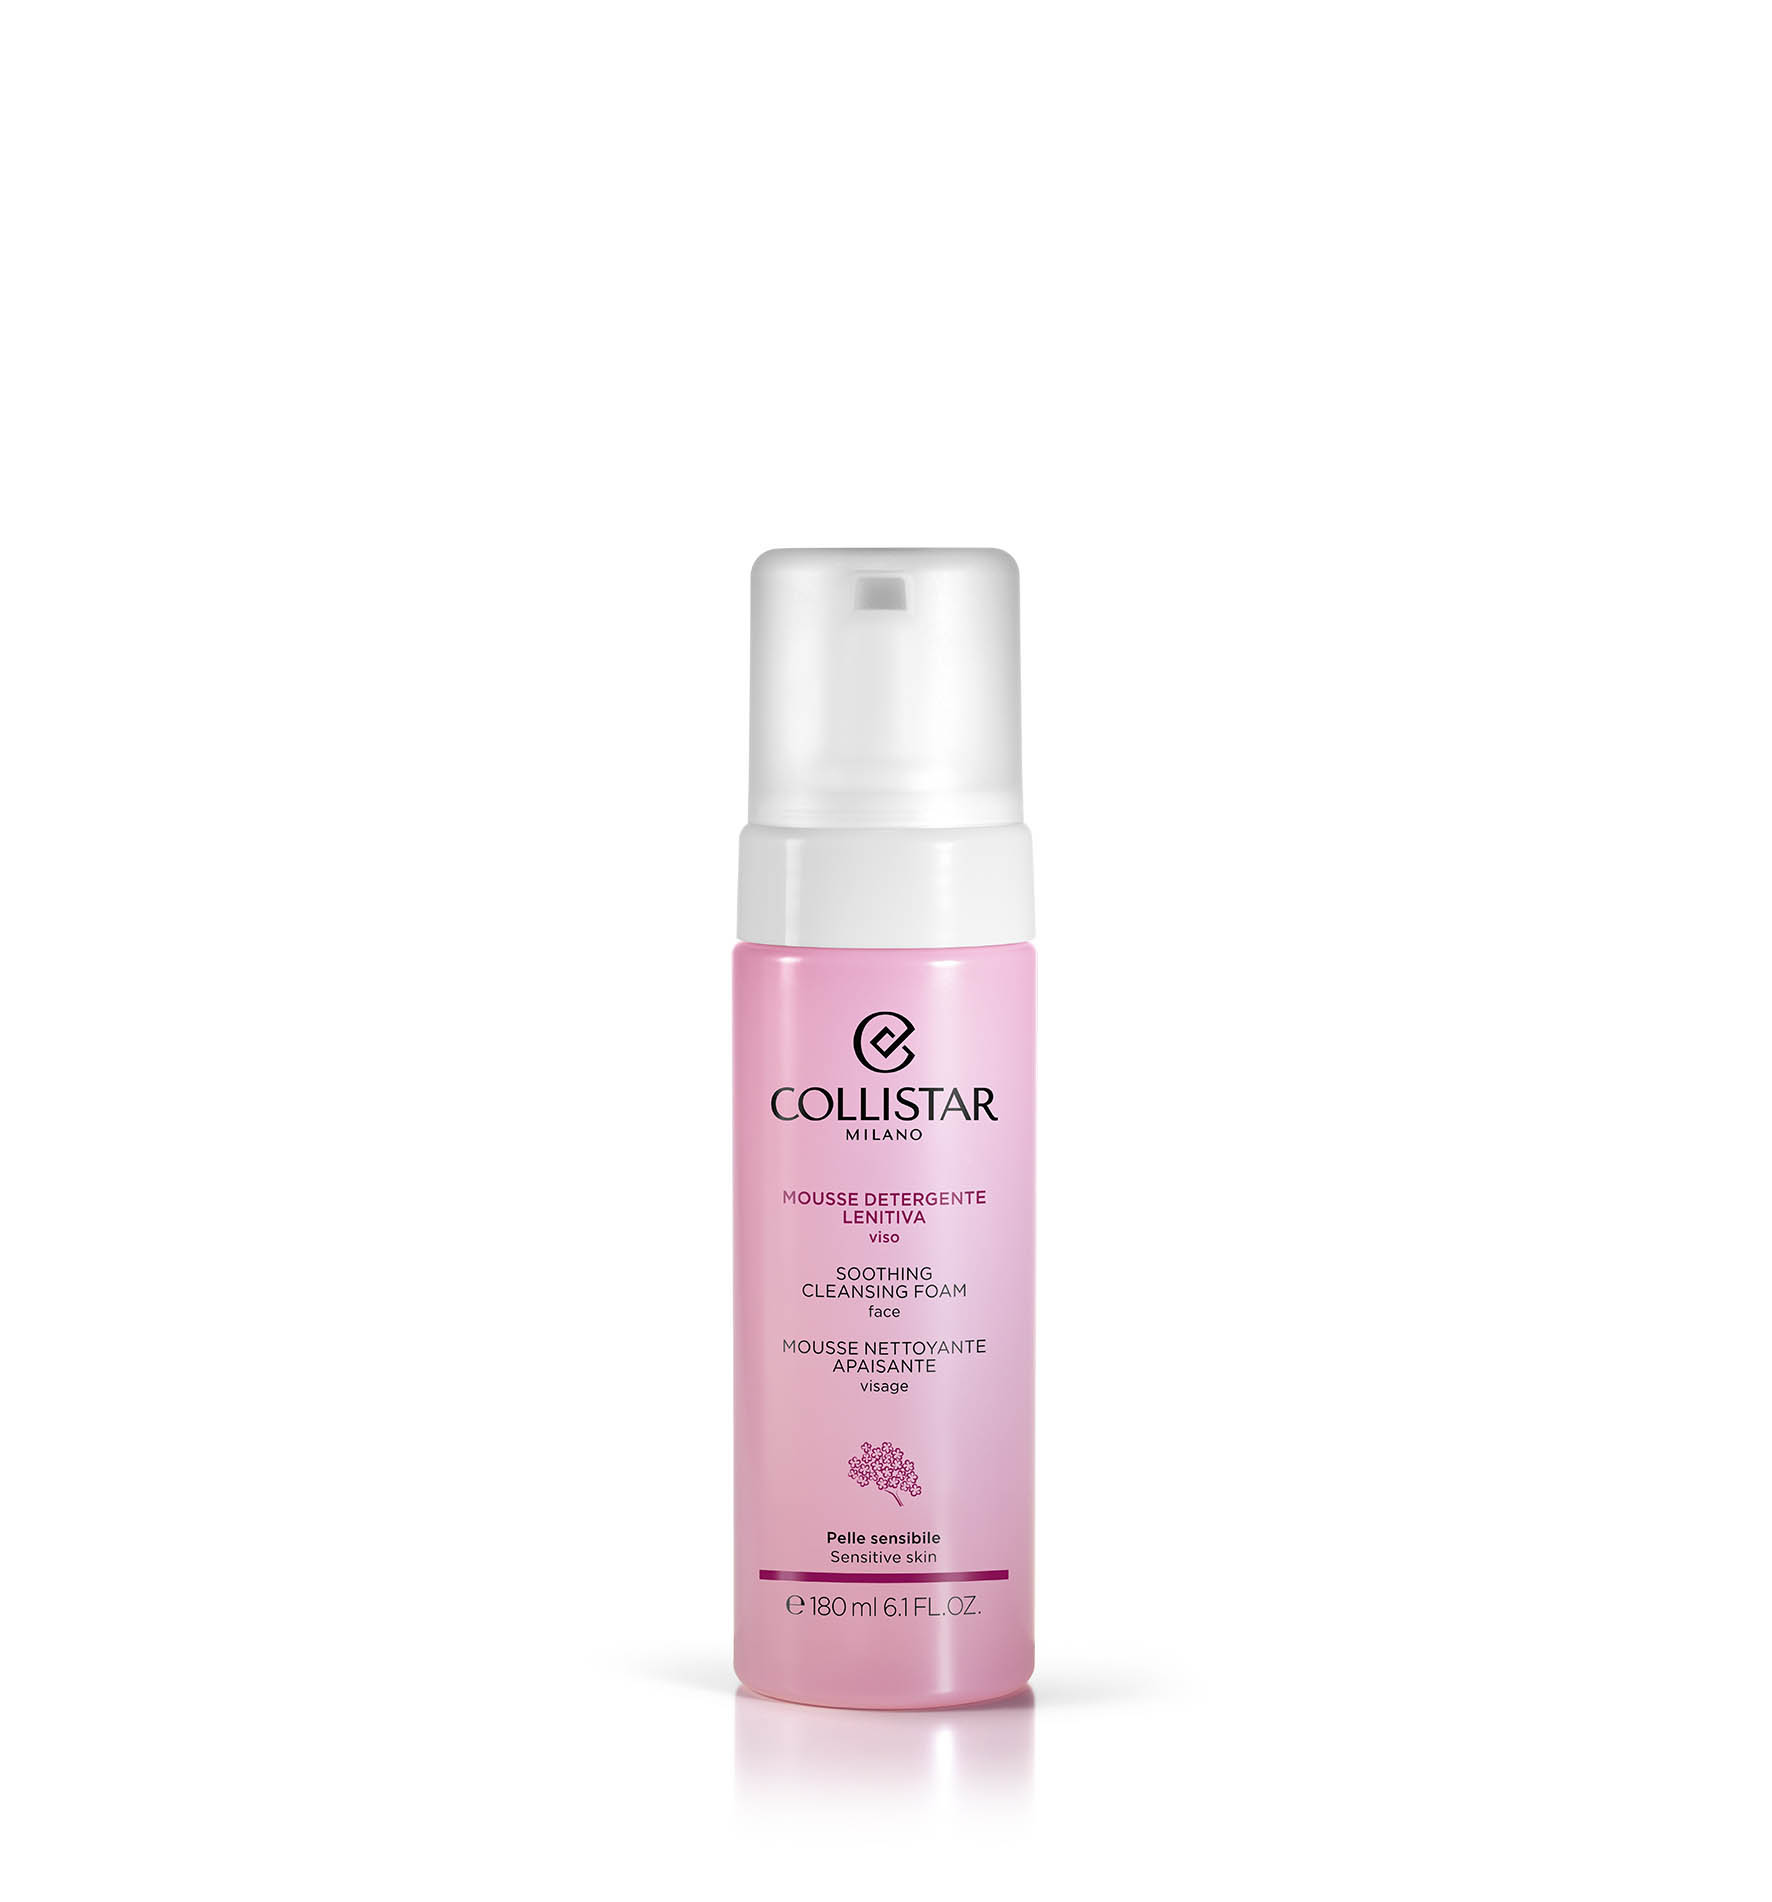 SOOTHING CLEANSING FOAM FACE - NEW | Collistar - Shop Online Ufficiale